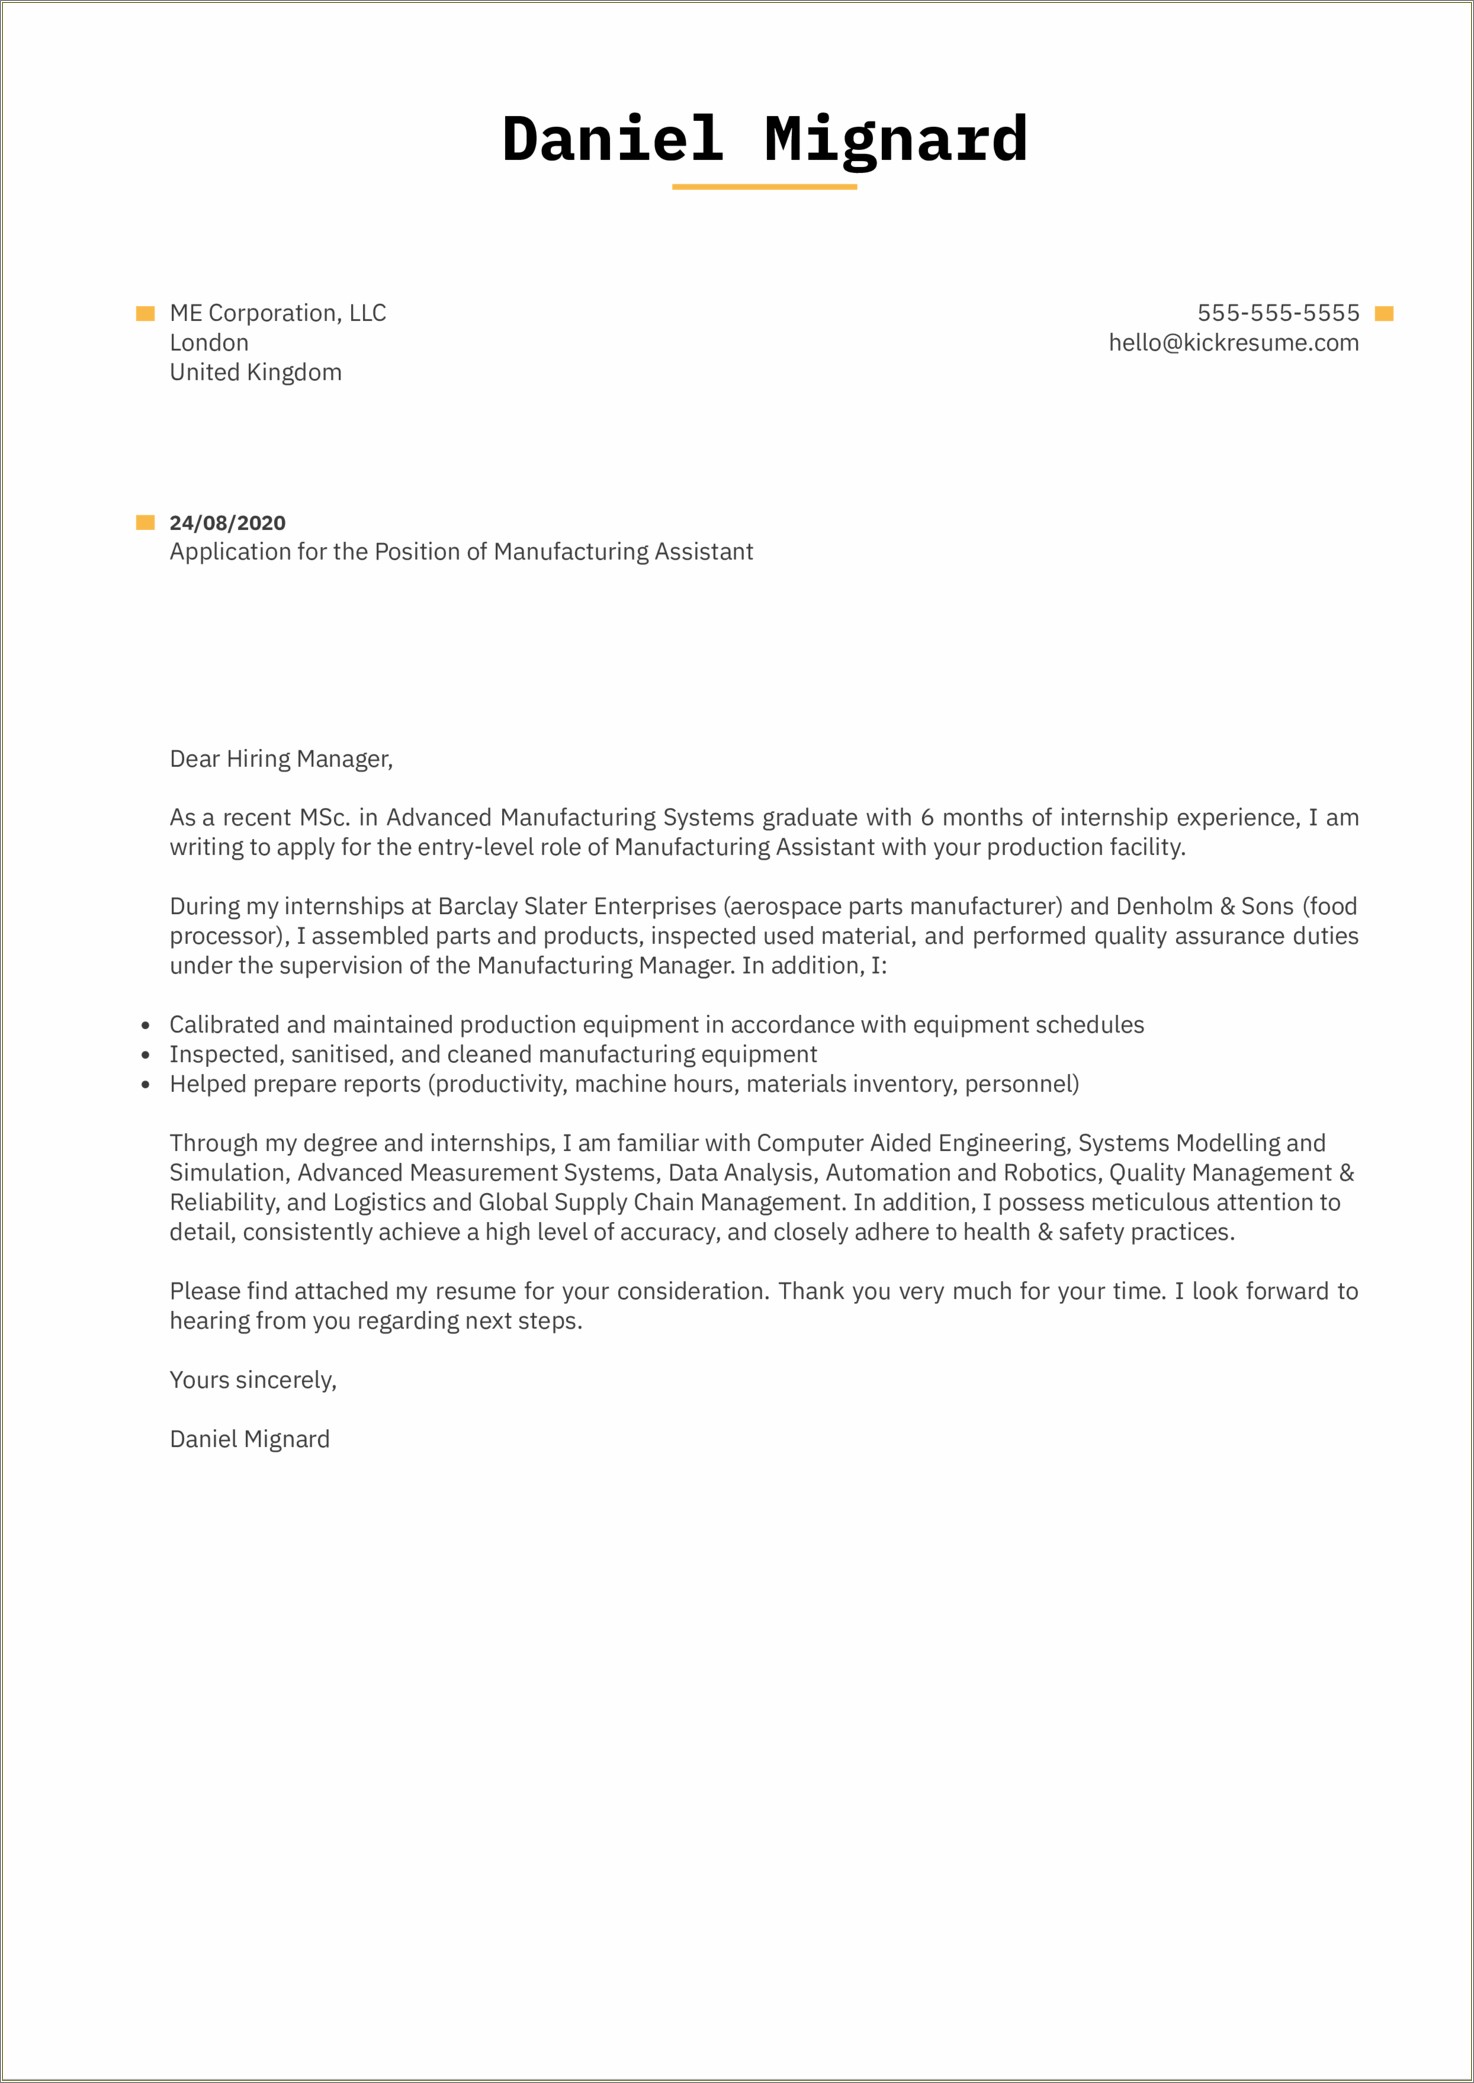 Resume Cover Letter For Janitor Position